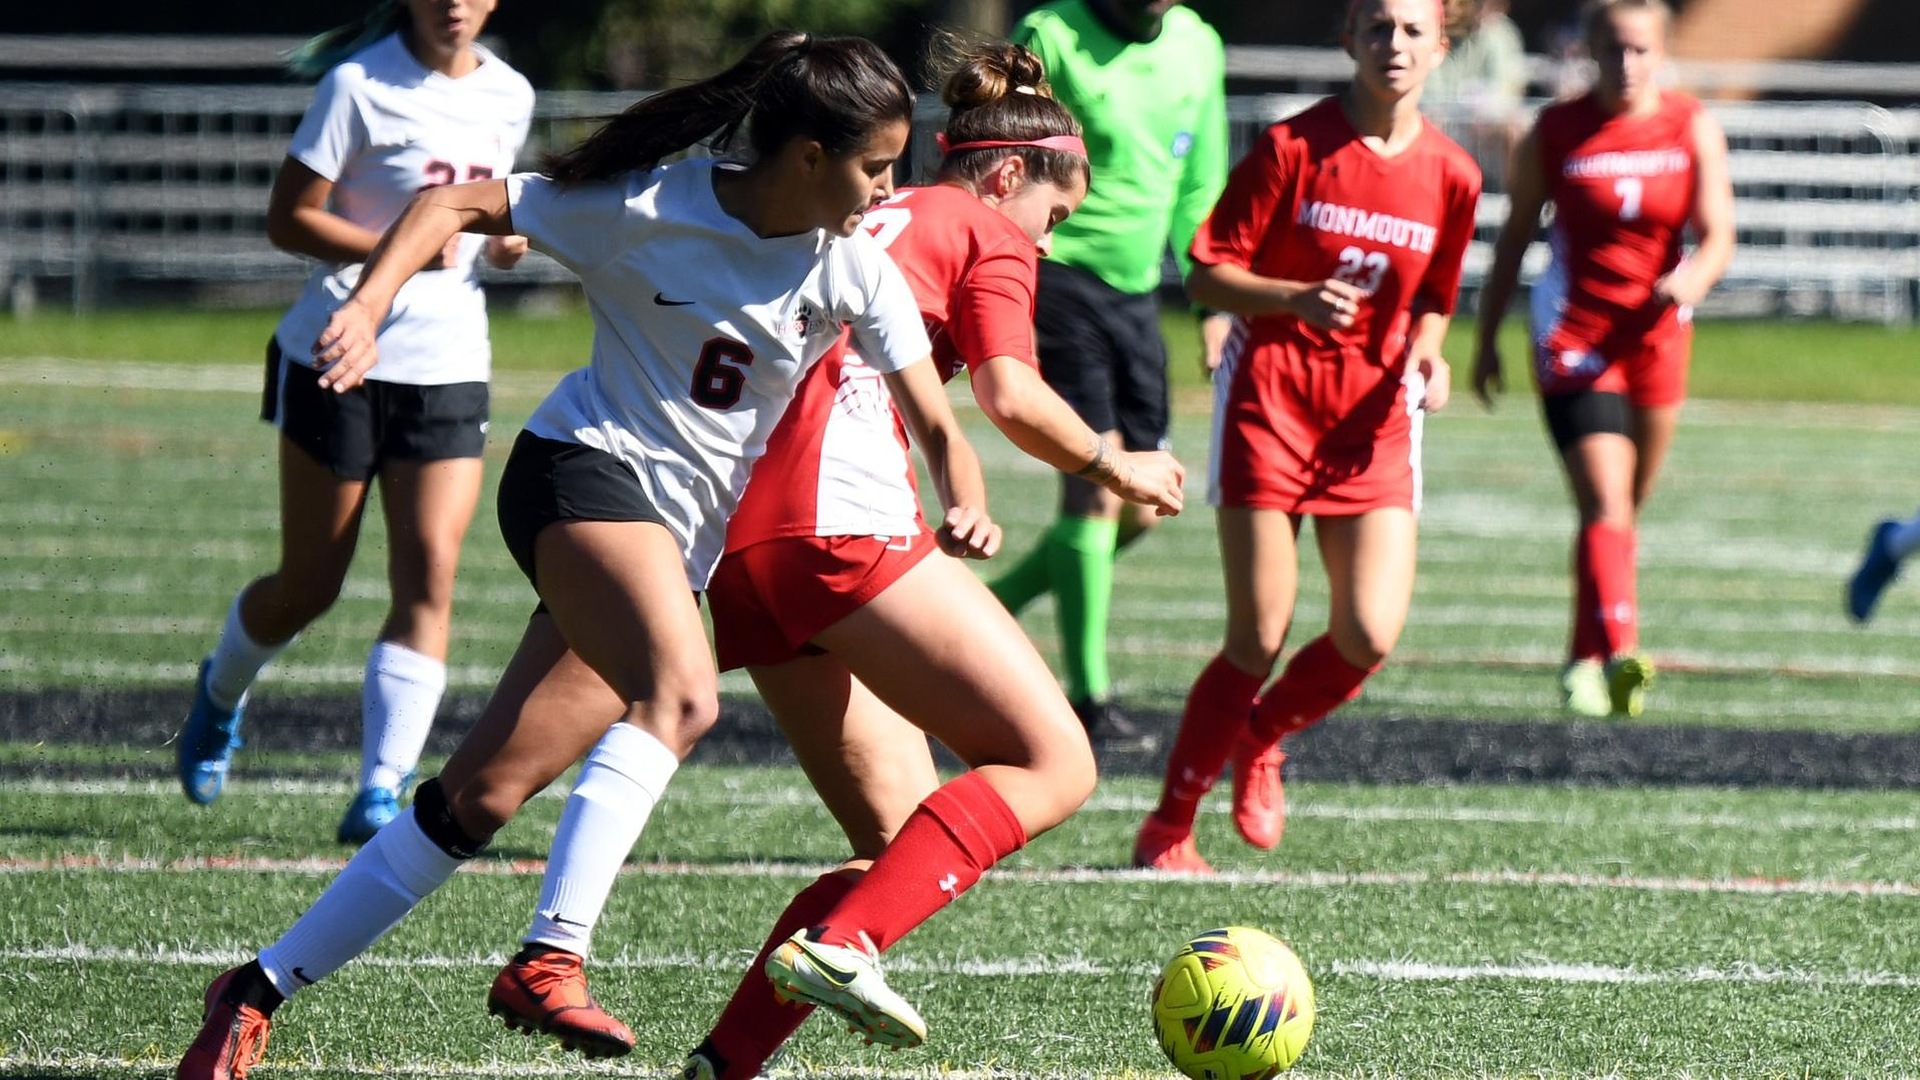 Foresters Extend Winning Streak, Remain Undefeated in Conference Play